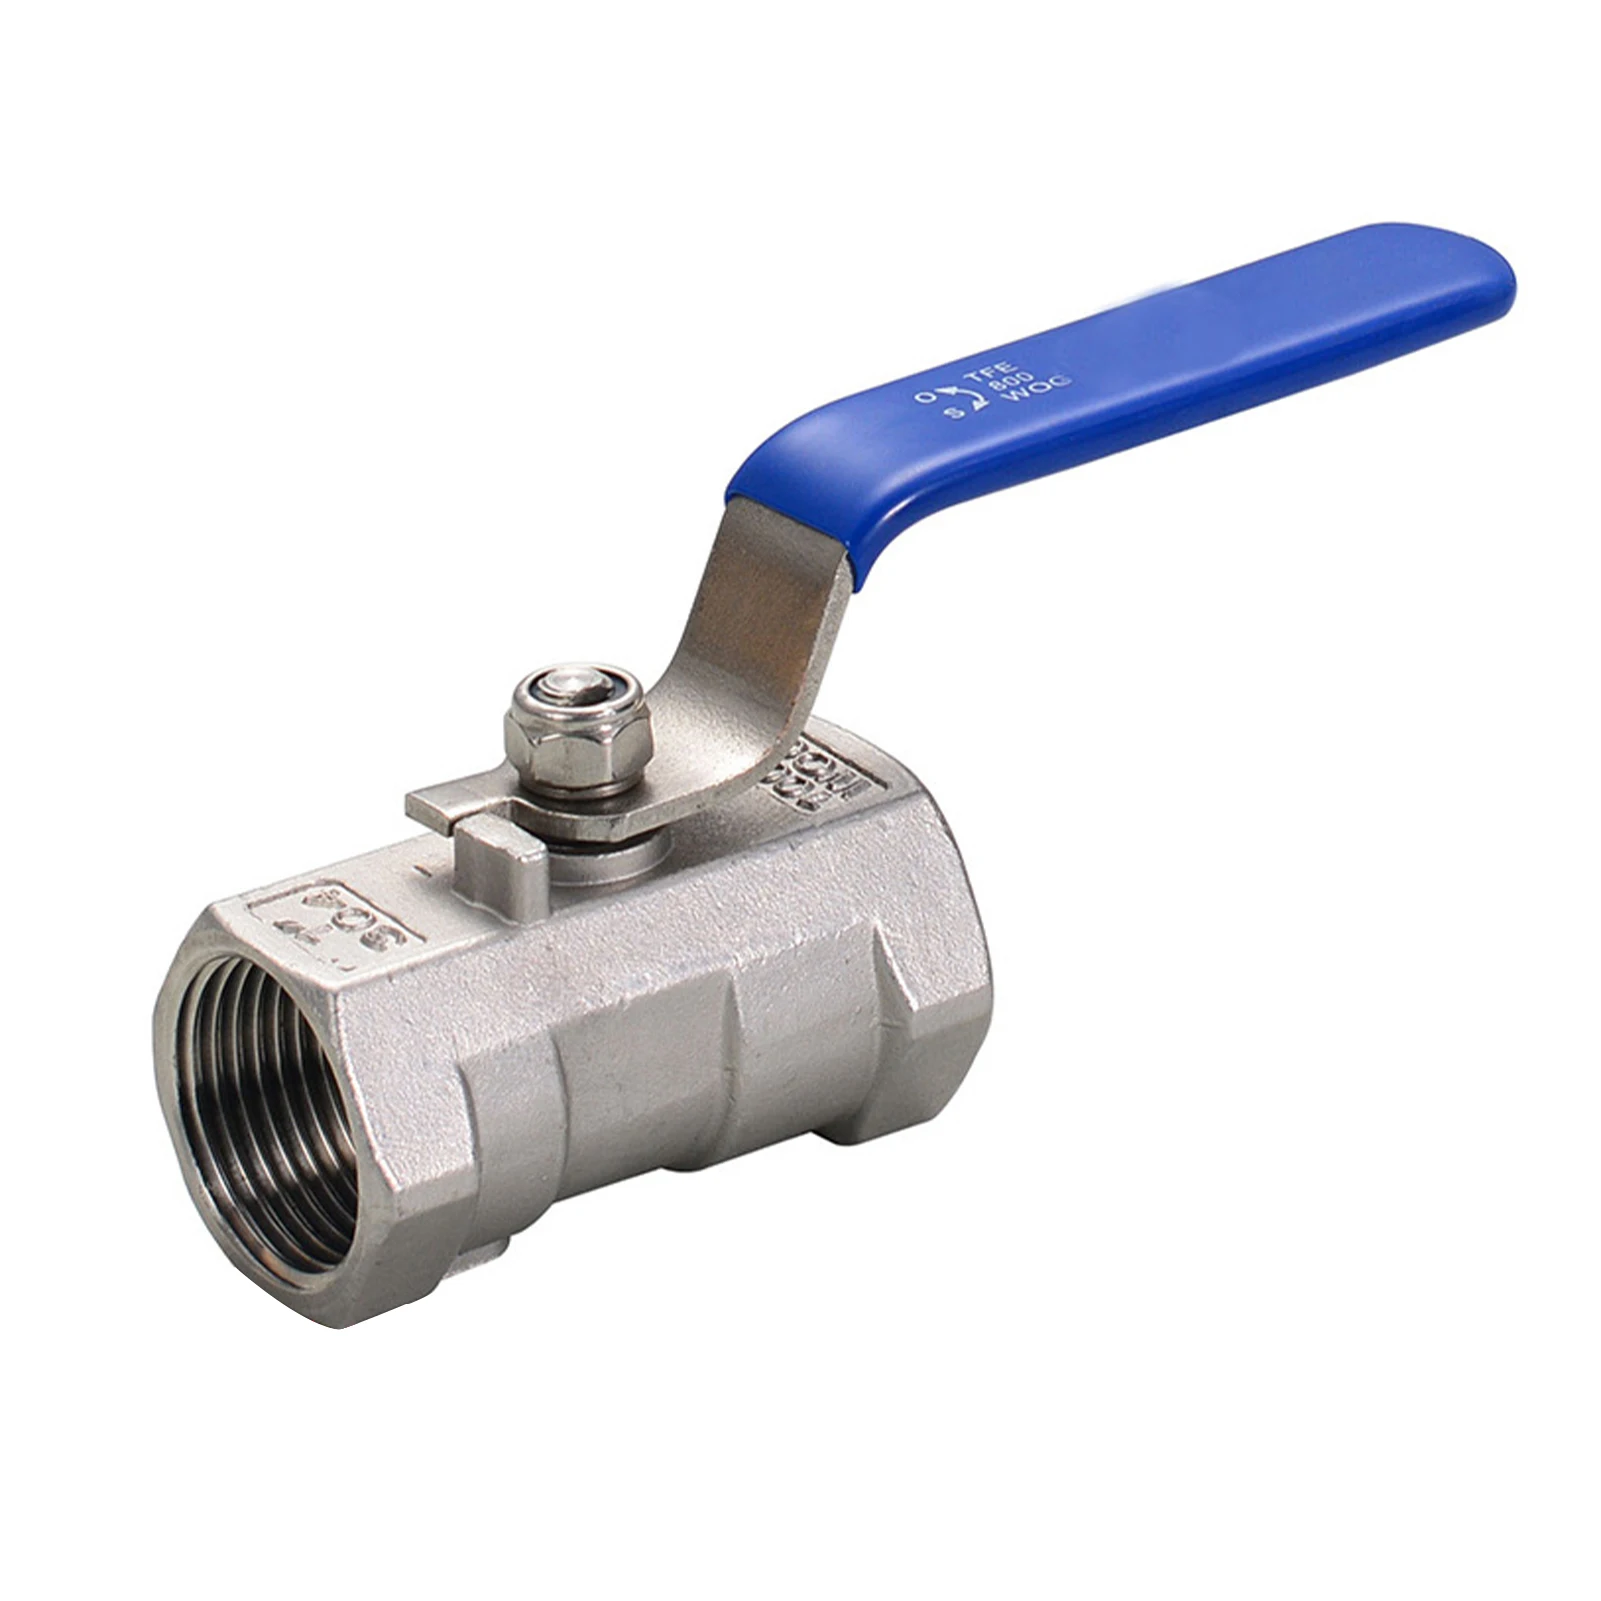 

1-1/2inch DN40 Stainless Steel Professional Internal Thread Steam Durable Home Easy Install Gas With Handle Ball Valve Tools